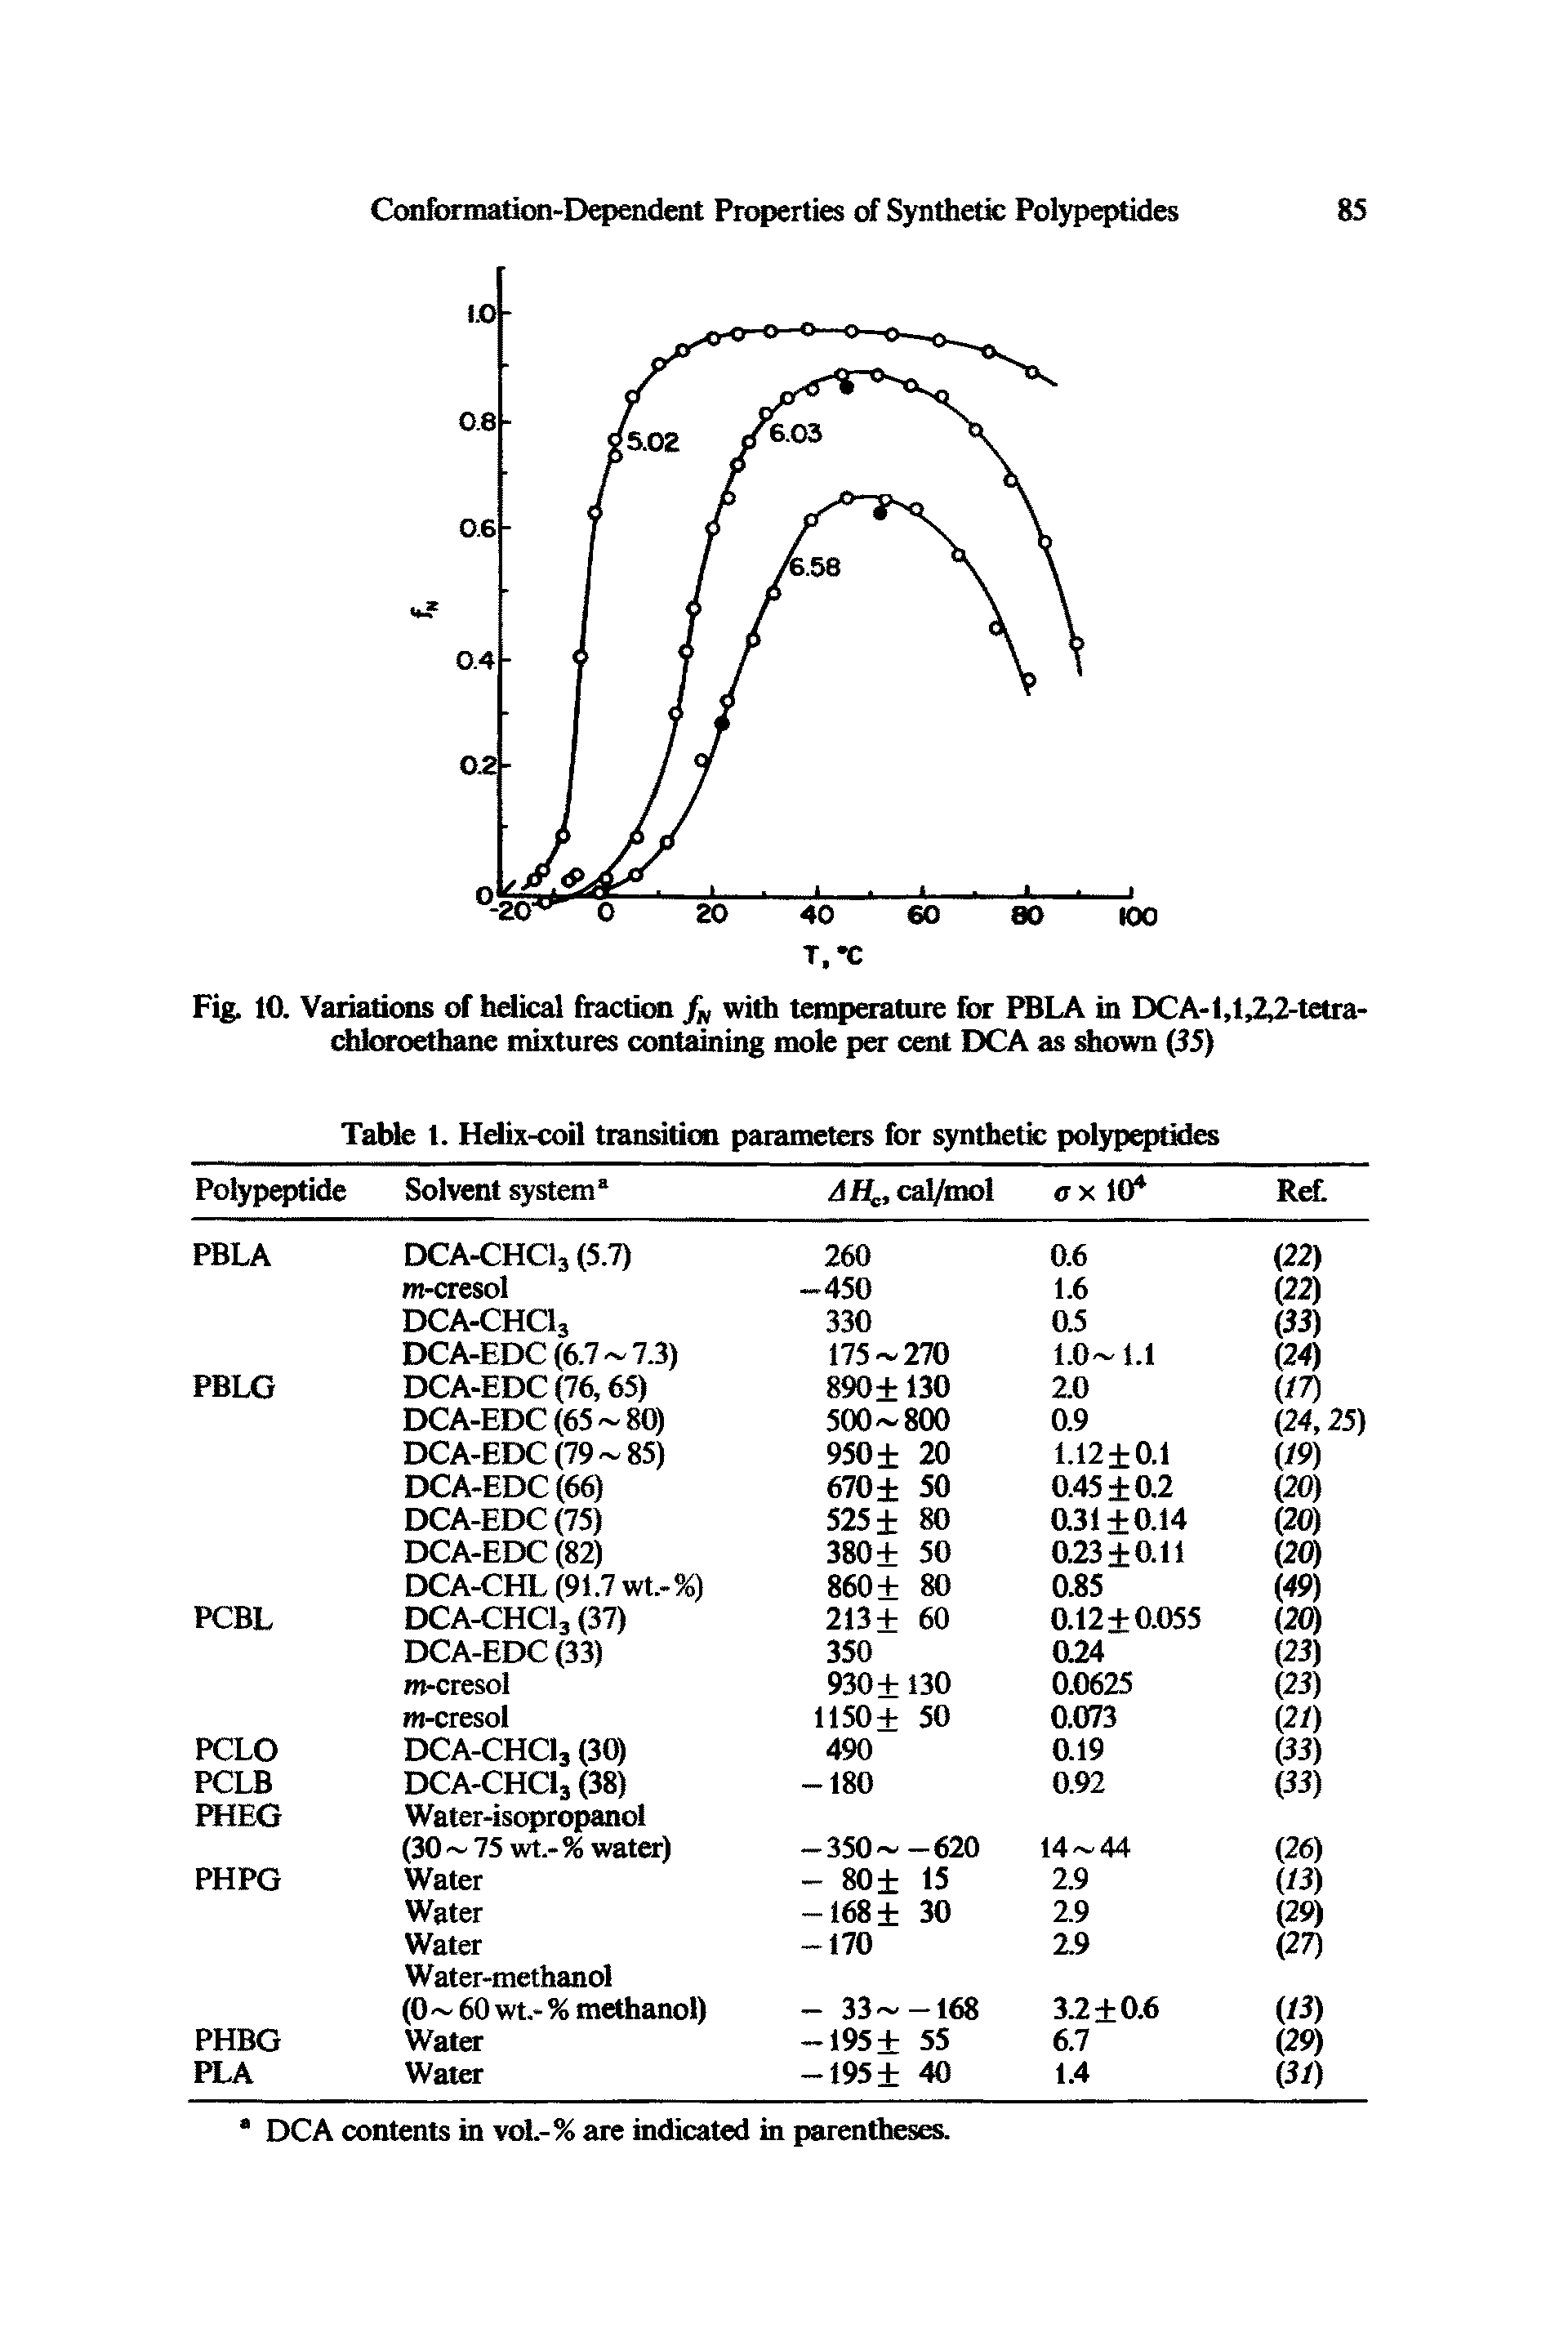 Table 1. Helix-coil transition parameters for synthetic polypeptides...